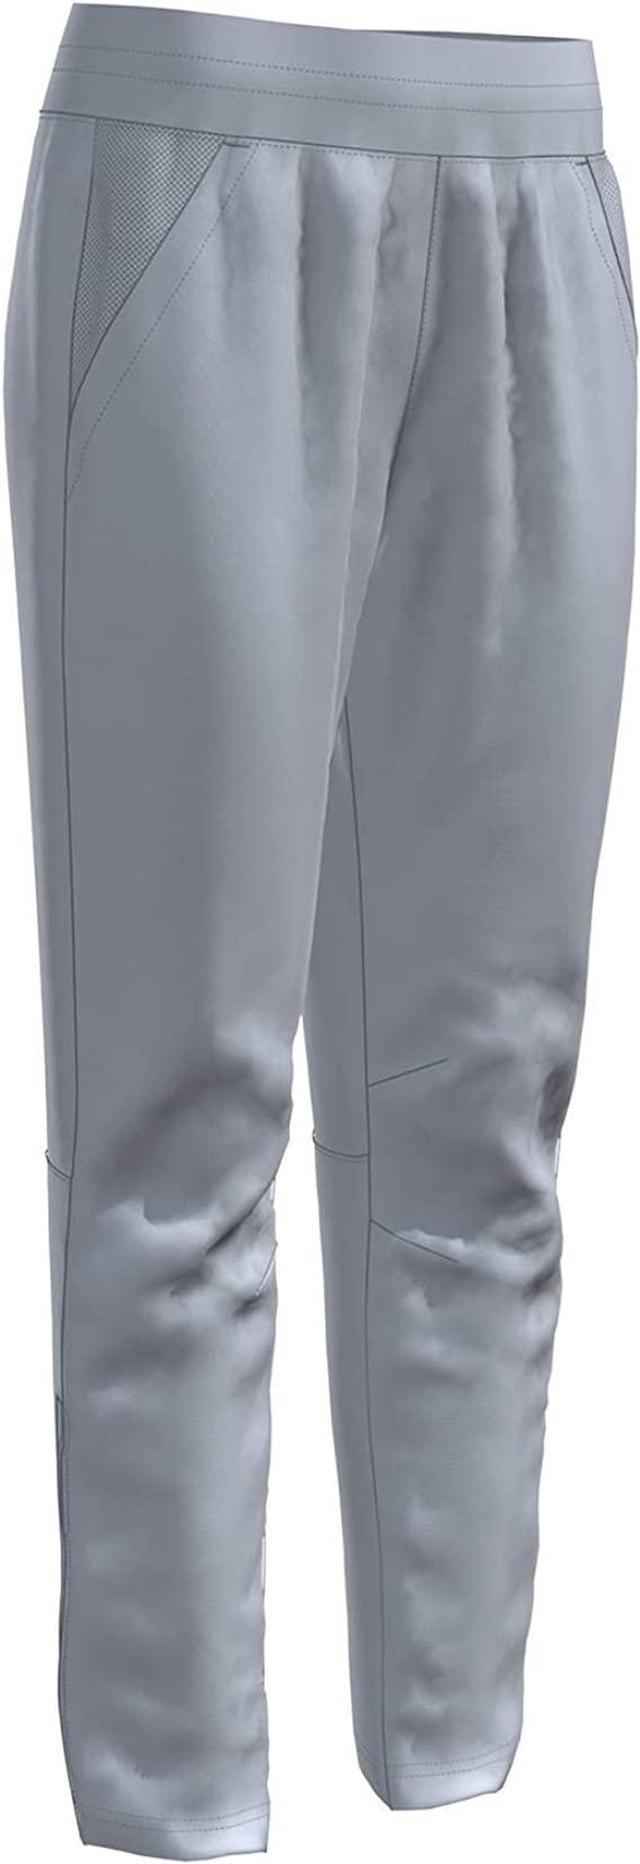 1343048 Under Armour Women's Squad 2.0 Woven Pants Halo Gray 2XL 